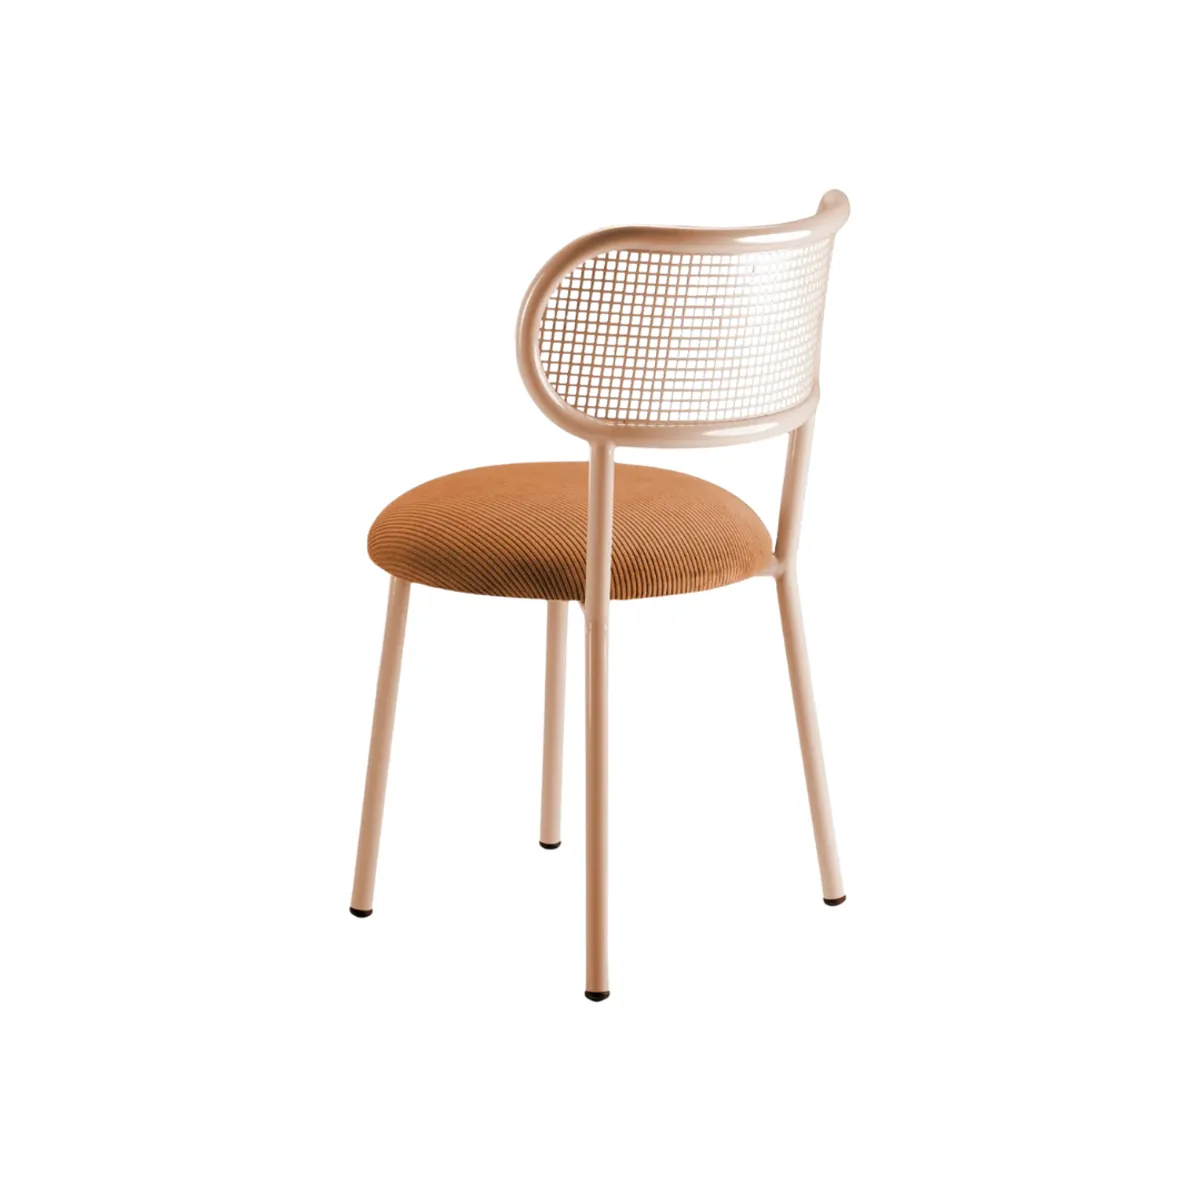 Emory side chair 4